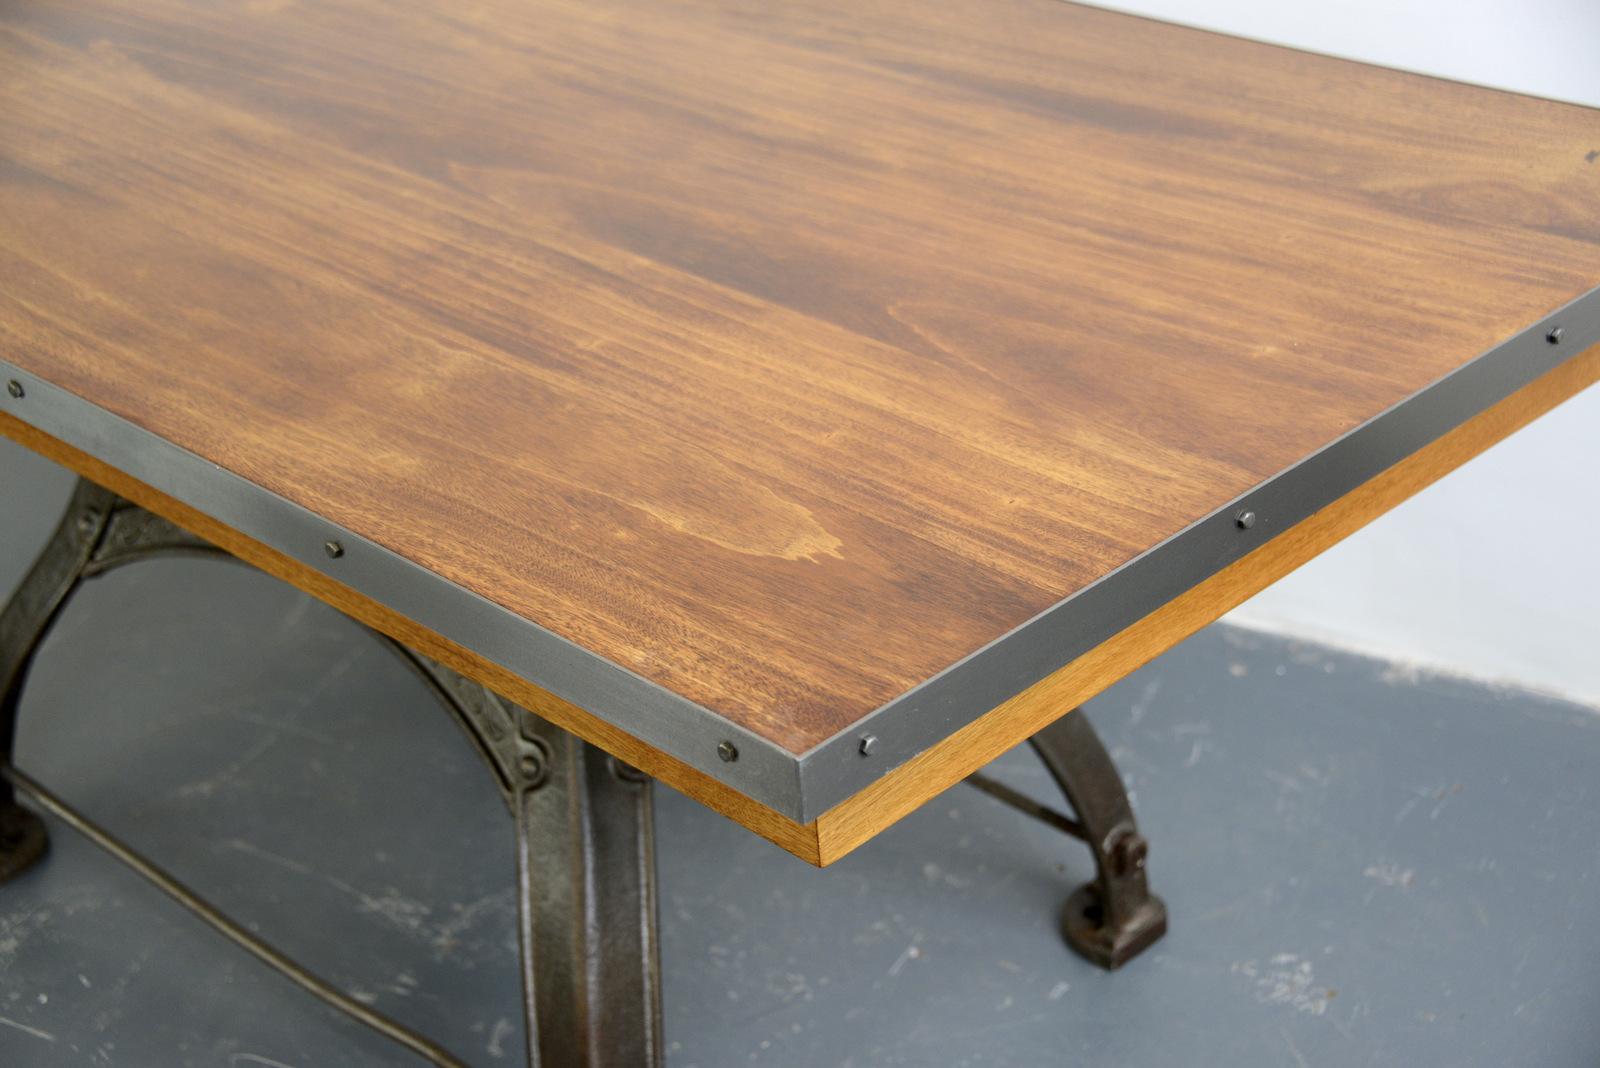 Early 20th Century English Industrial Table by Bamfords, circa 1910